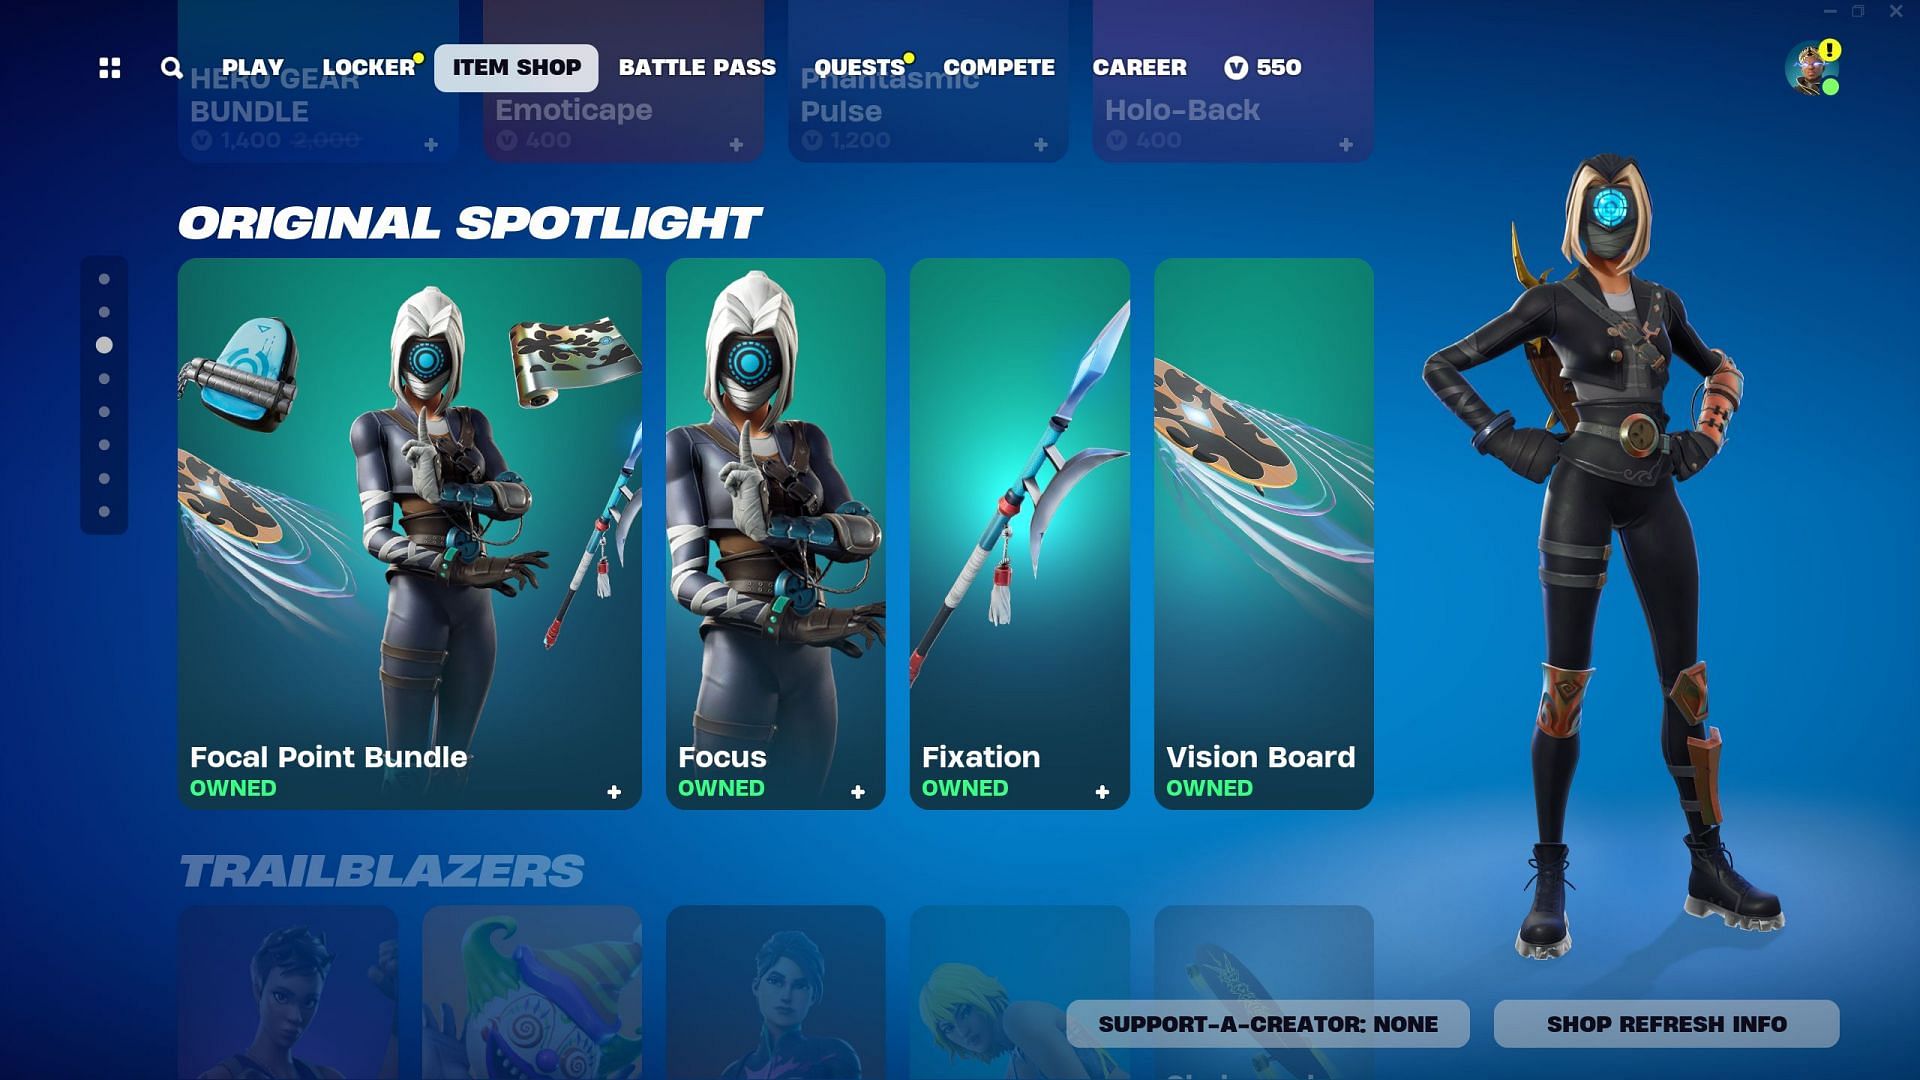 The Focus Skin is currently listed in the Item Shop (Image via Epic Games/Fortnite)